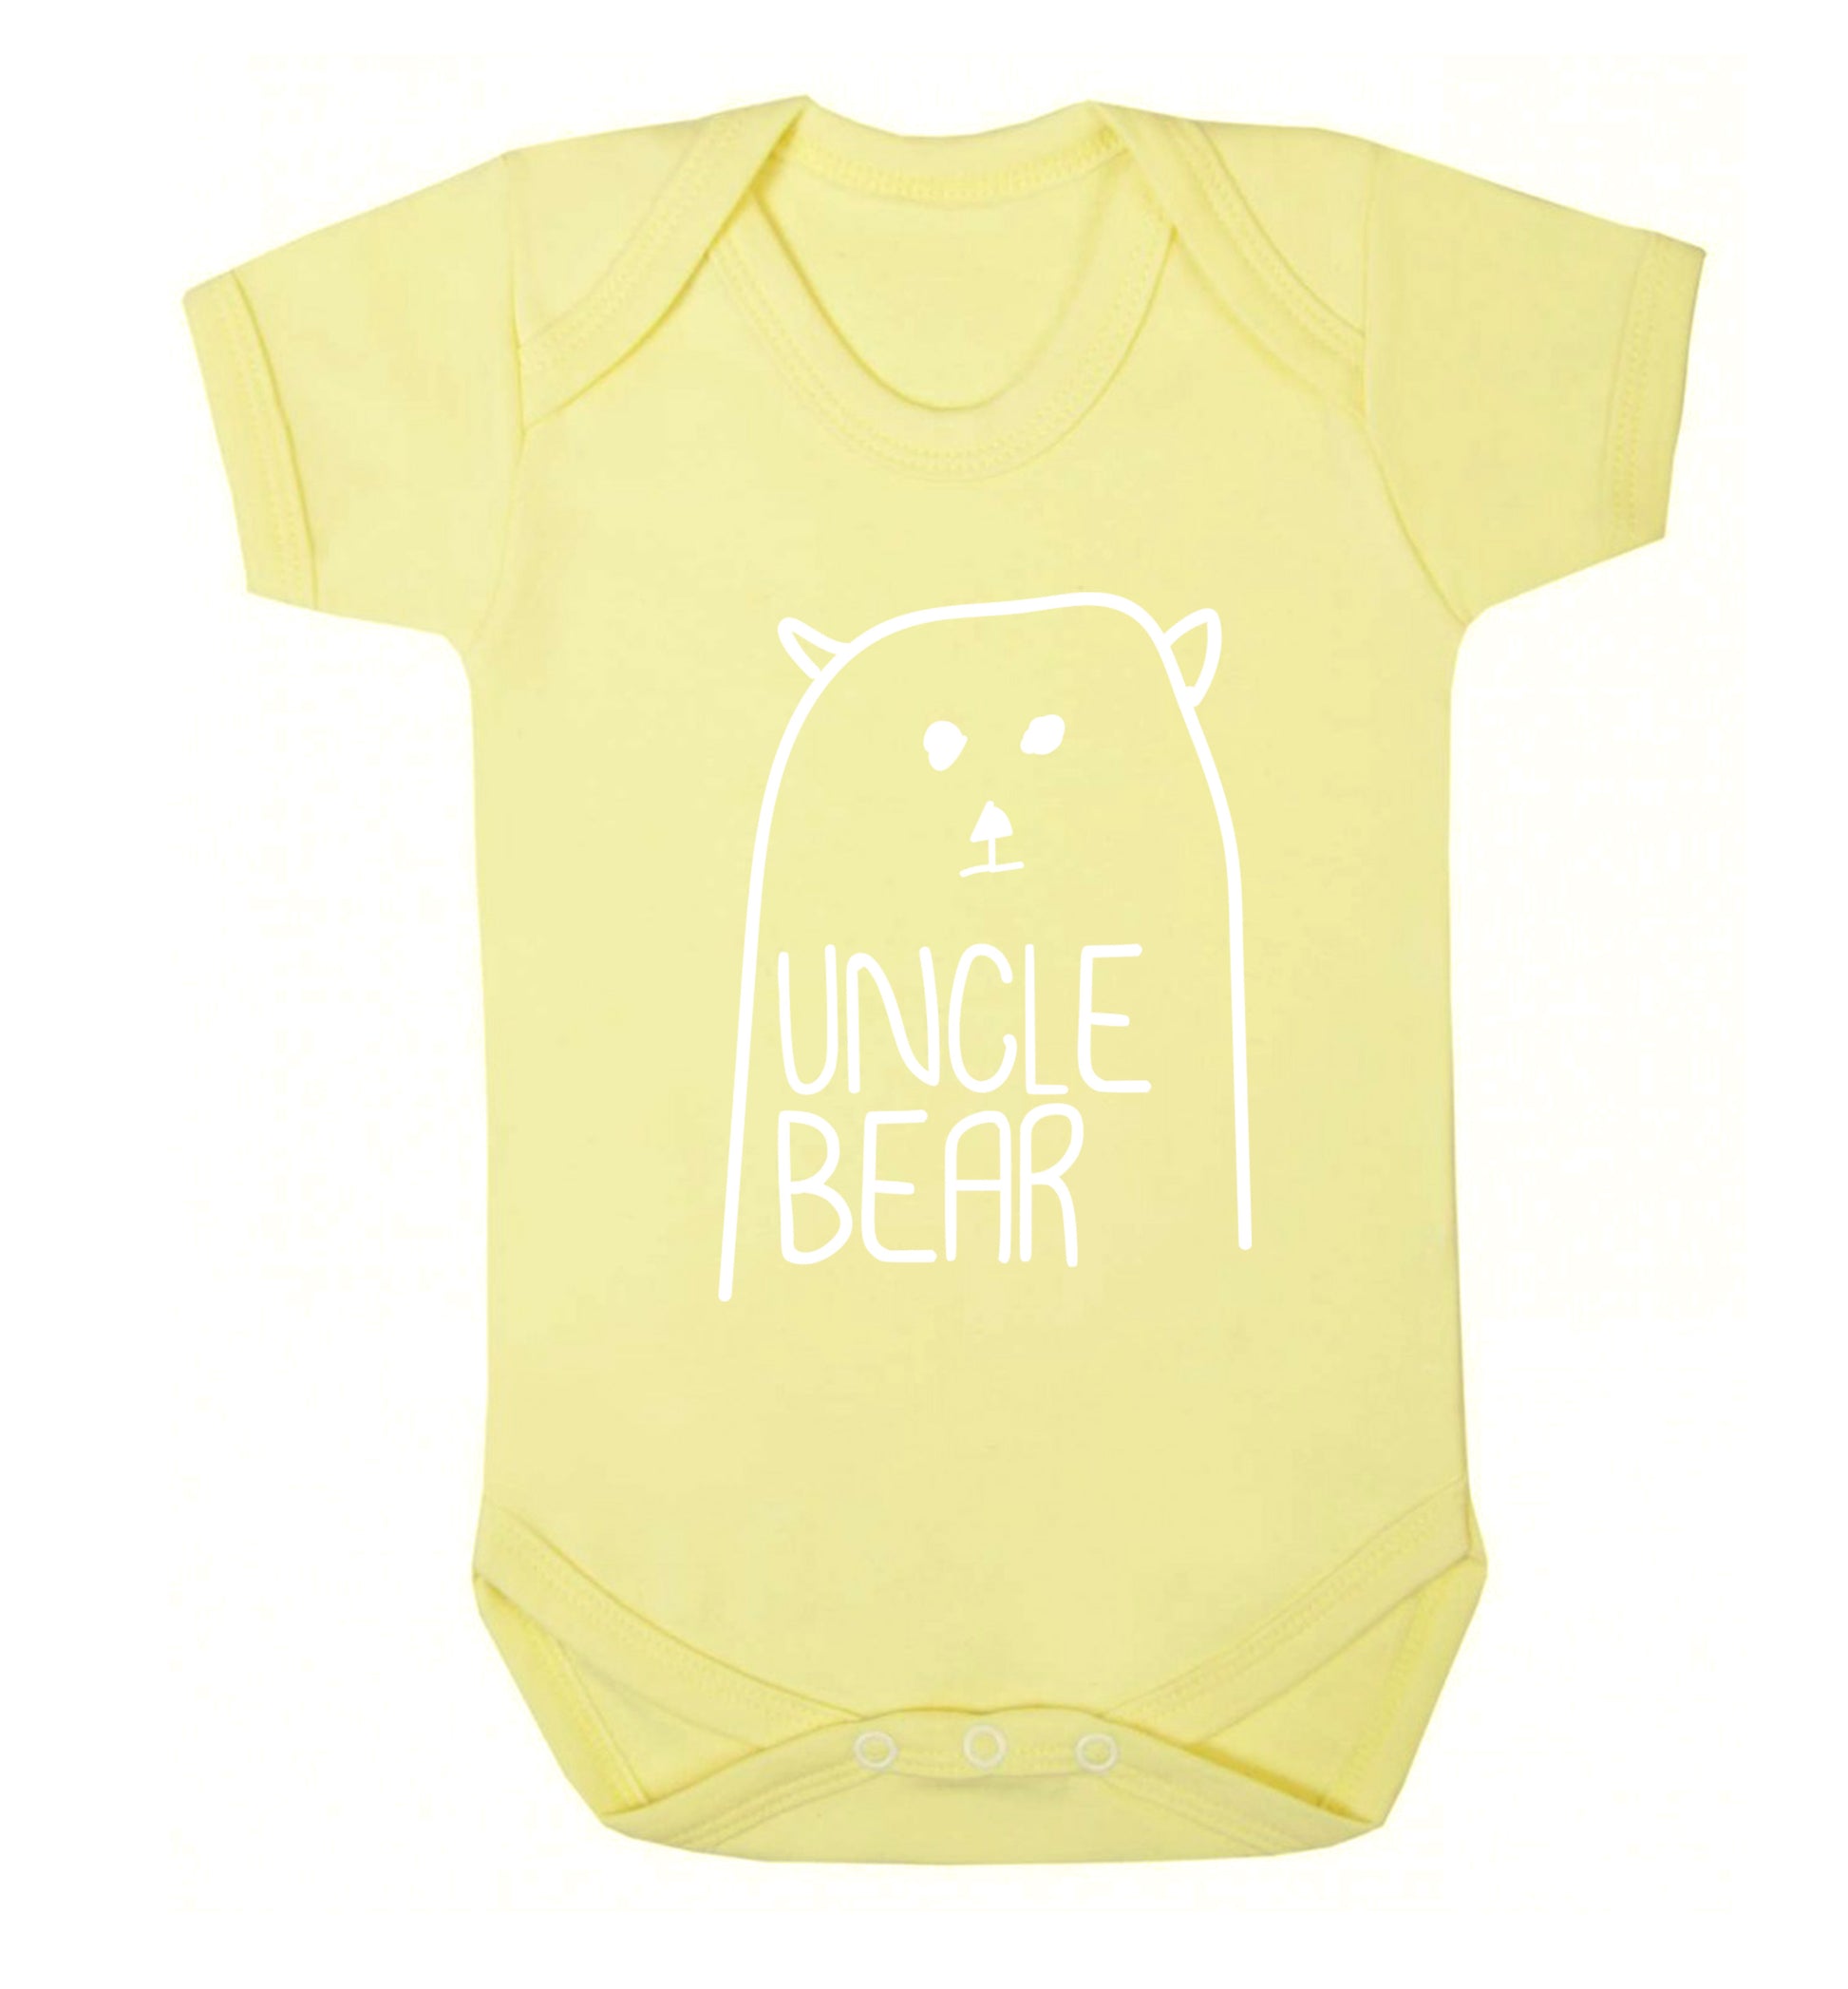 Uncle bear Baby Vest pale yellow 18-24 months